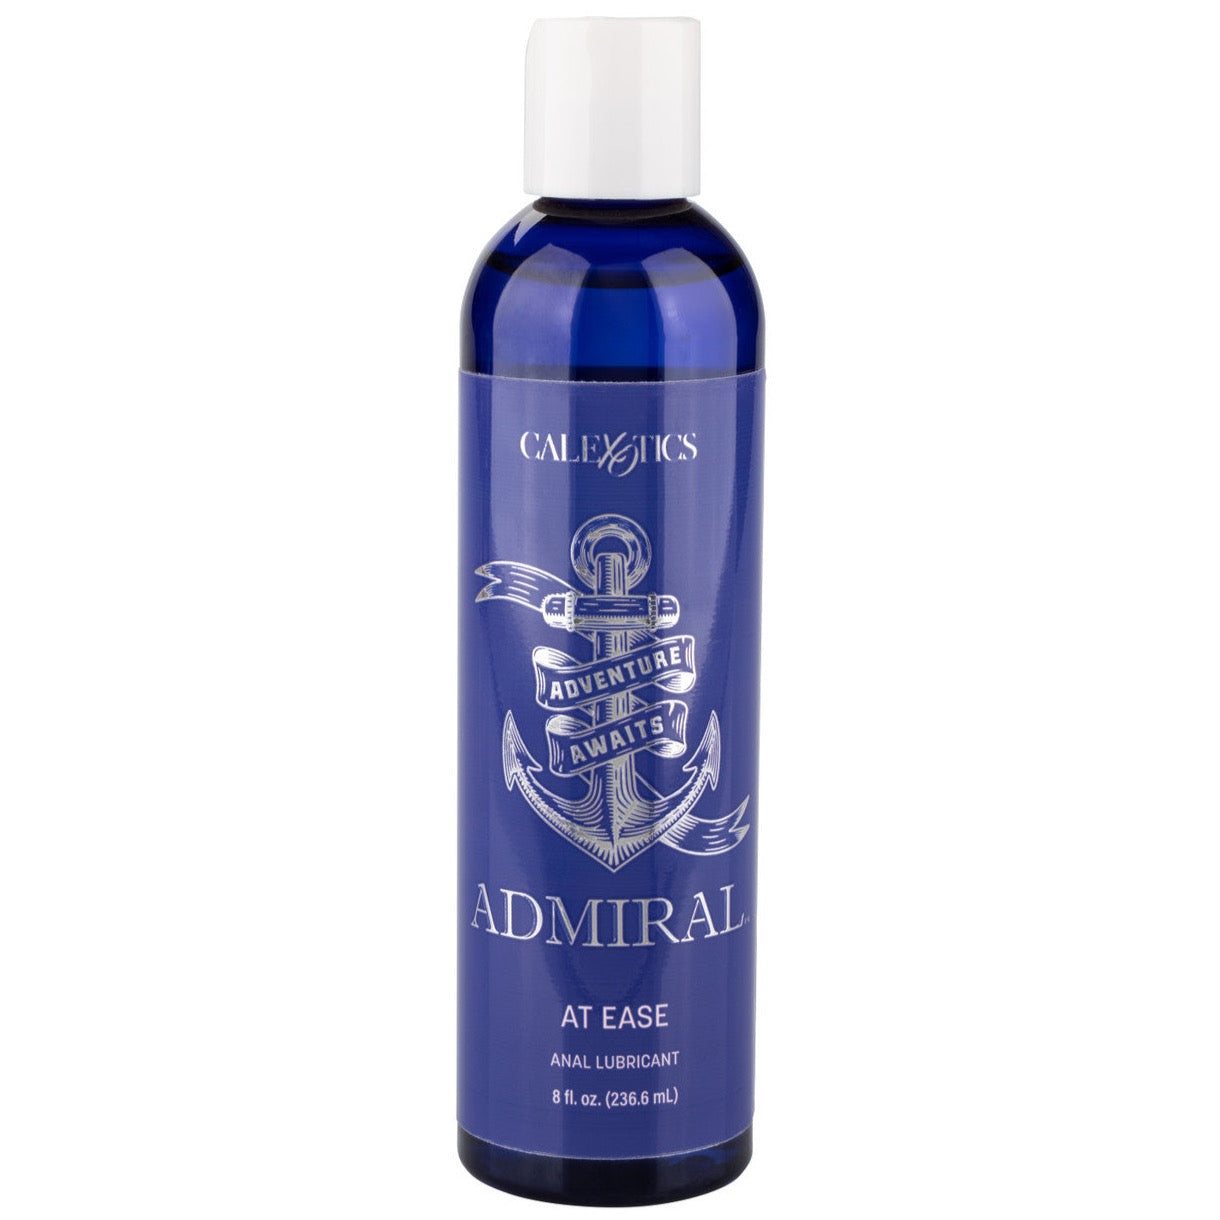 CalExotics Admiral At Ease Anal Lubricant 8 oz. - Extreme Toyz Singapore - https://extremetoyz.com.sg - Sex Toys and Lingerie Online Store - Bondage Gear / Vibrators / Electrosex Toys / Wireless Remote Control Vibes / Sexy Lingerie and Role Play / BDSM / Dungeon Furnitures / Dildos and Strap Ons &nbsp;/ Anal and Prostate Massagers / Anal Douche and Cleaning Aide / Delay Sprays and Gels / Lubricants and more...